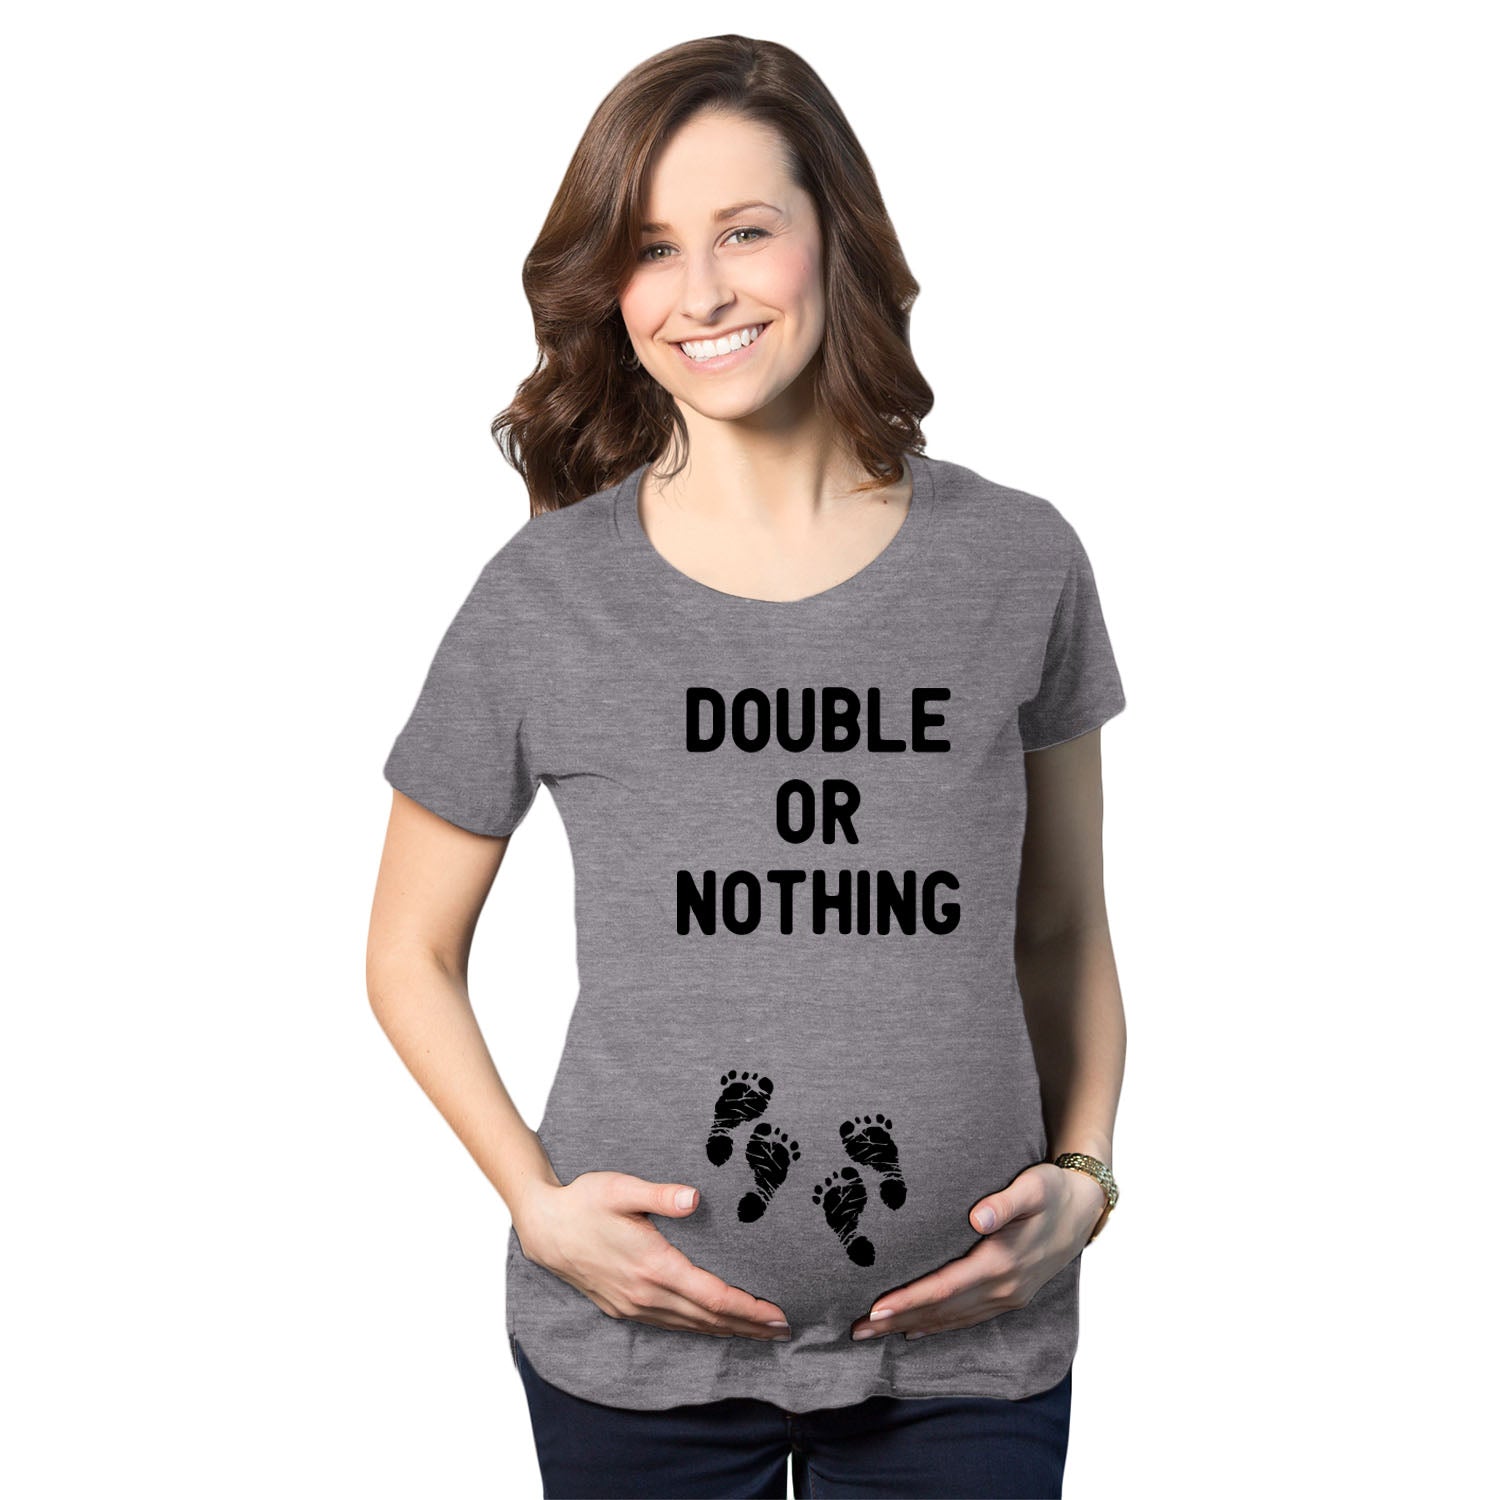 Funny Dark Heather Grey Double Or Nothing Maternity T Shirt Nerdy Sarcastic Tee